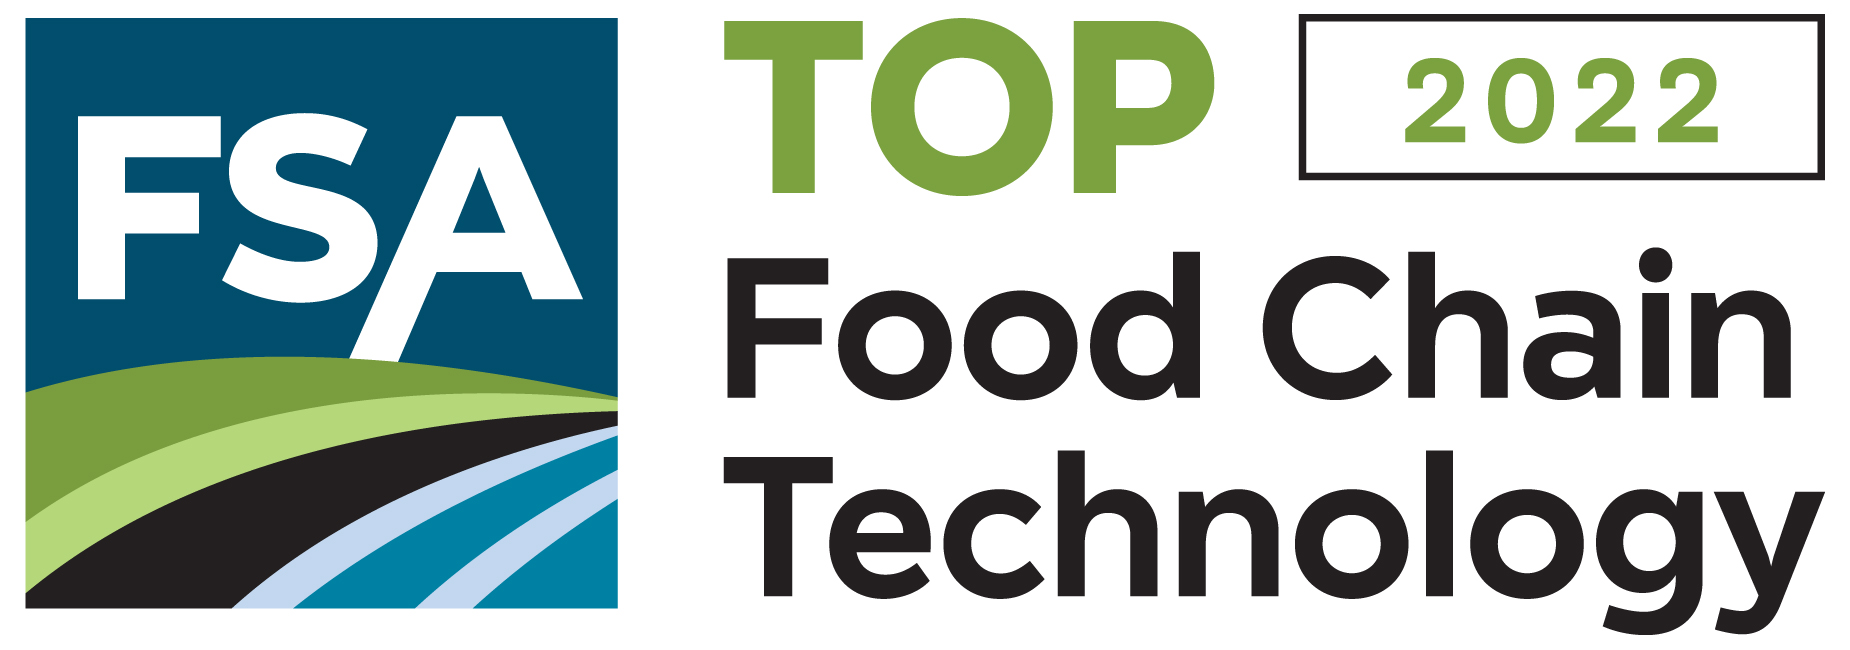 Food Shippers of America’s Top Food Chain Technology program highlights standout technologies in food transportation, logistics, distribution and supply chain management.